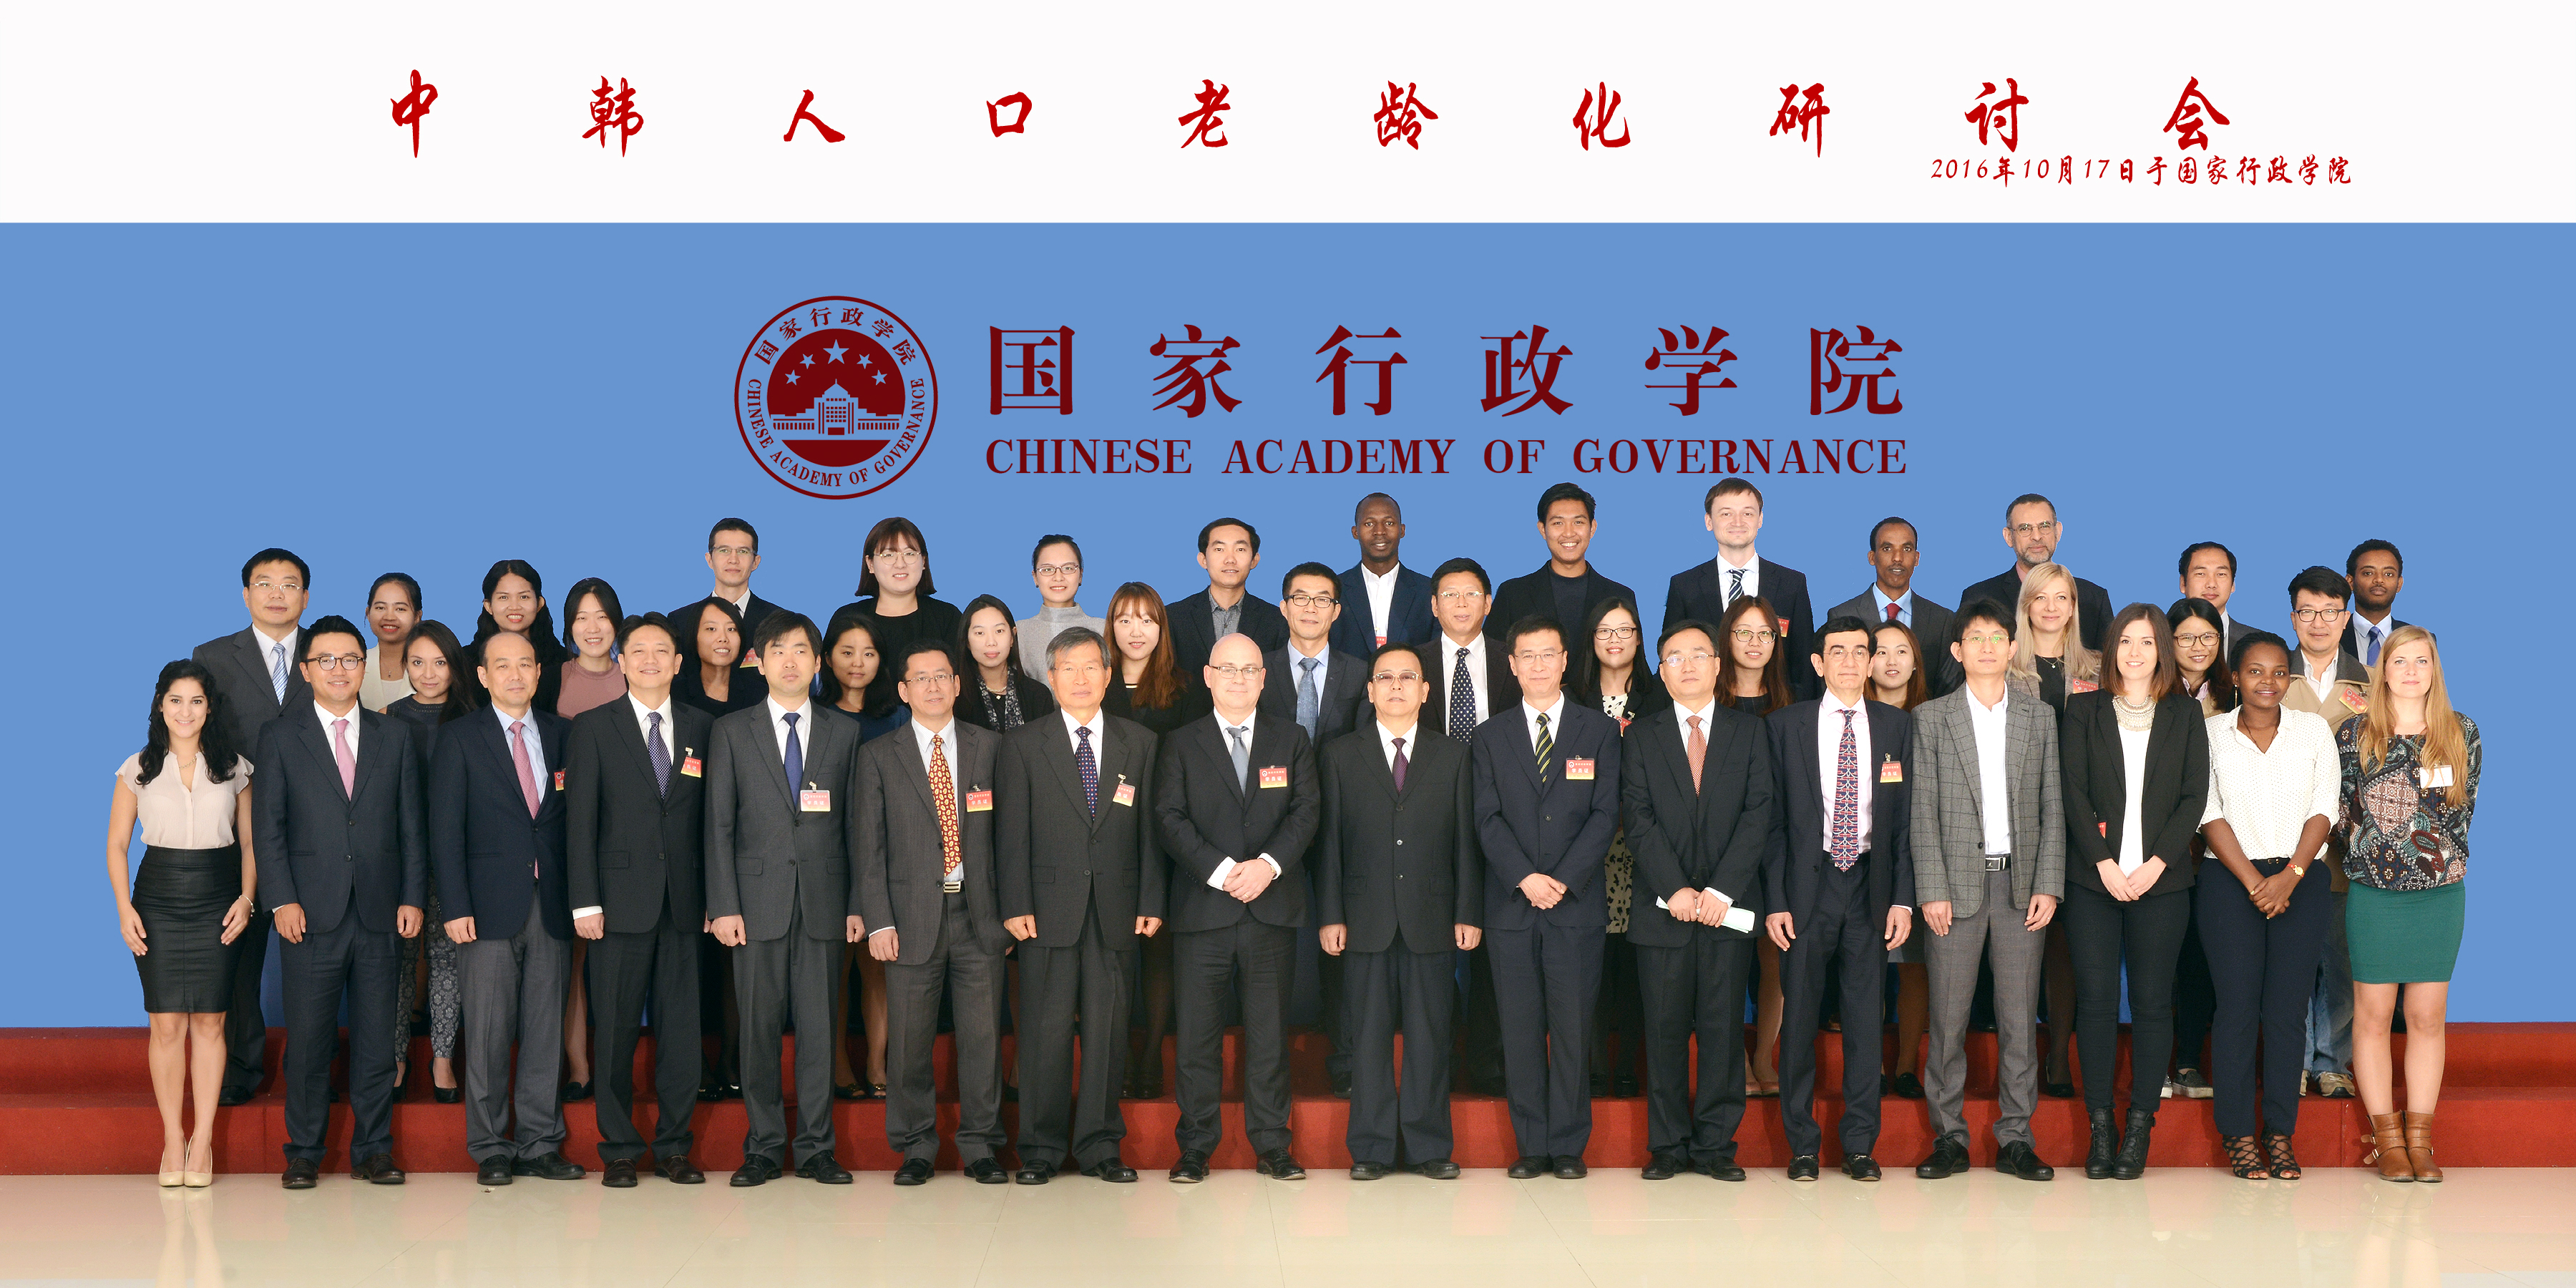 KDI School, the World Bank, Chinese Academy of Governance gather to tackle aging society